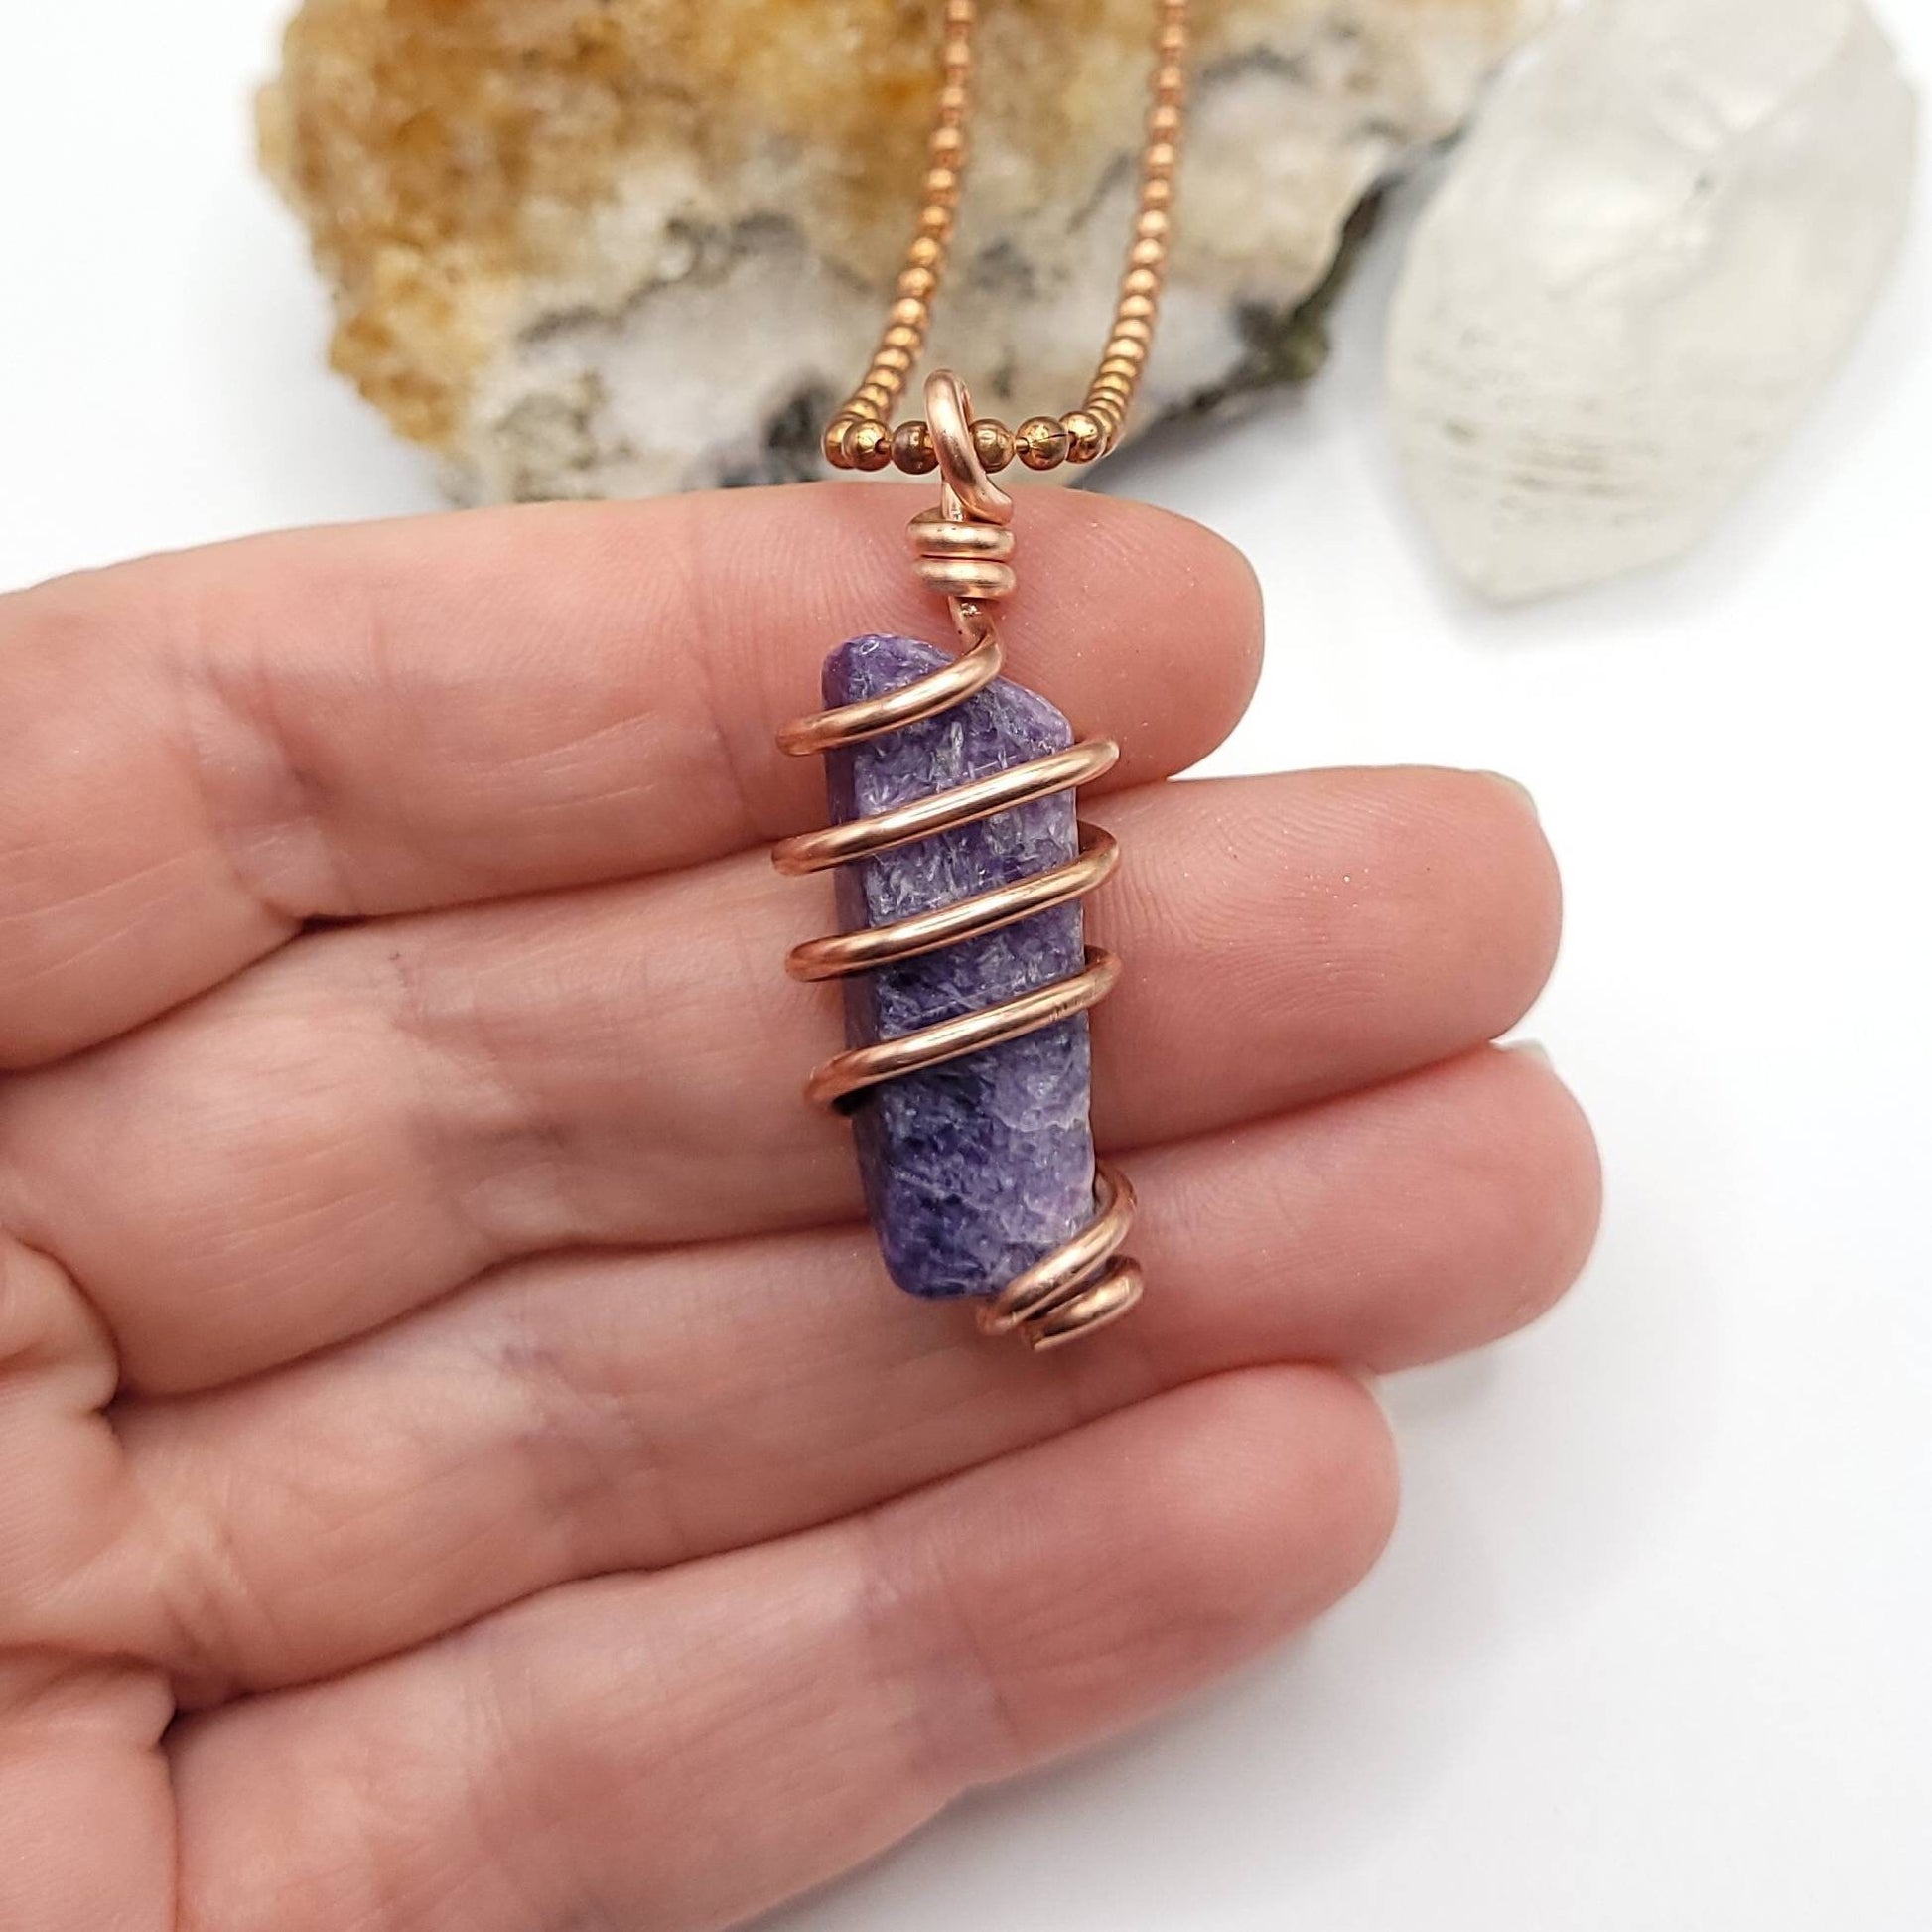 Charoite Necklace, Copper Wire Wrapped Charoite Pendant, Charoite Crystal | Aids in Spiritual Growth, Inspiration and Transformation